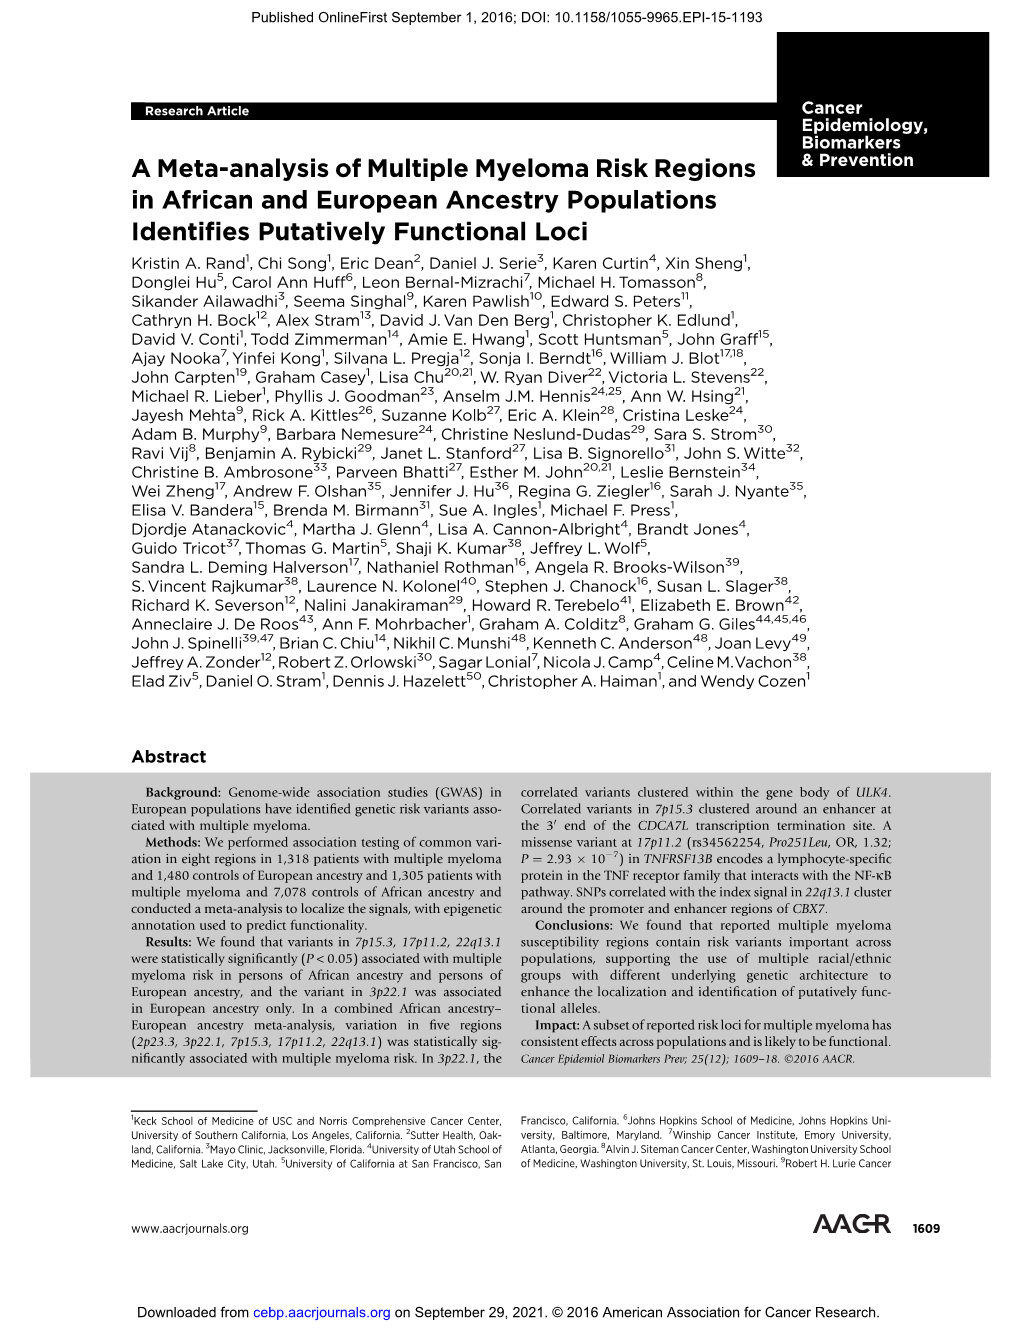 A Meta-Analysis of Multiple Myeloma Risk Regions in African and European Ancestry Populations Identifies Putatively Functional Loci